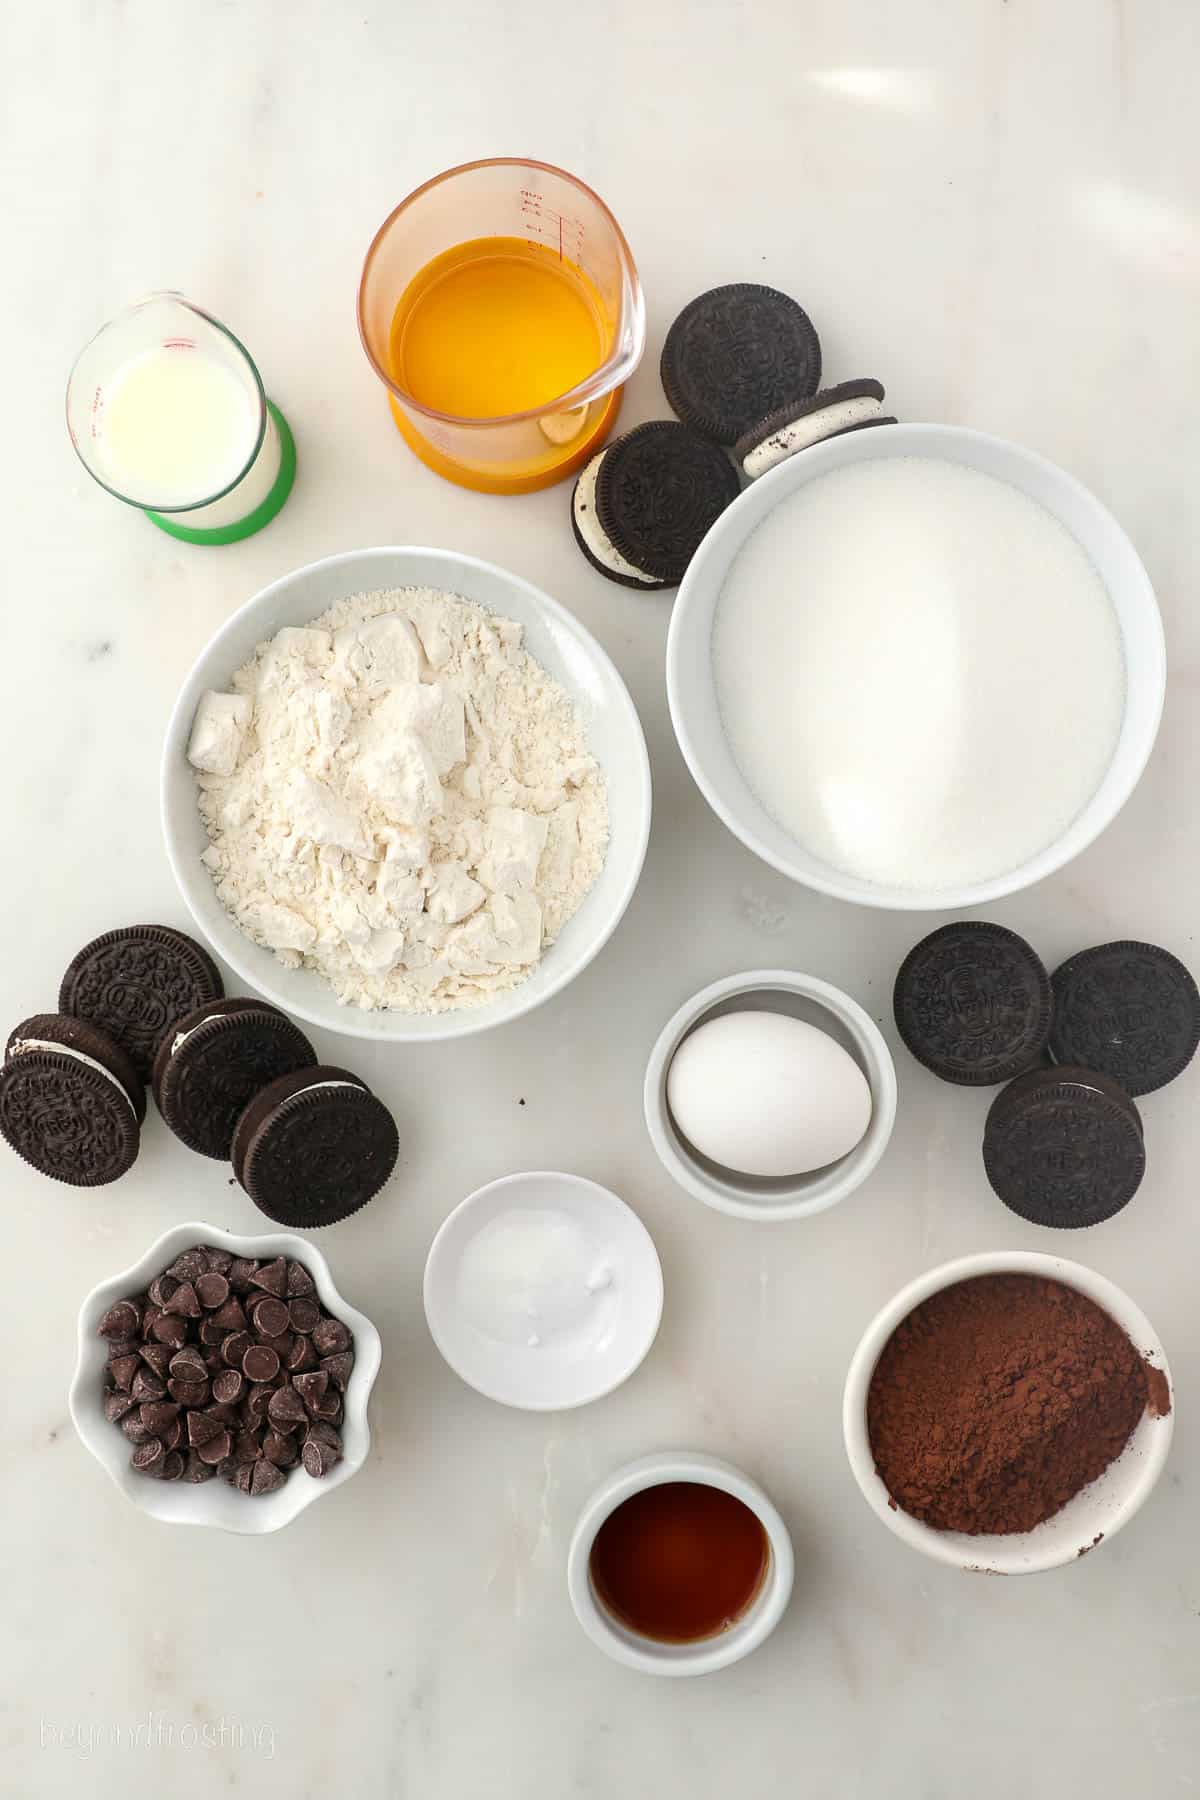 The ingredients for homemade Oreo brownies.